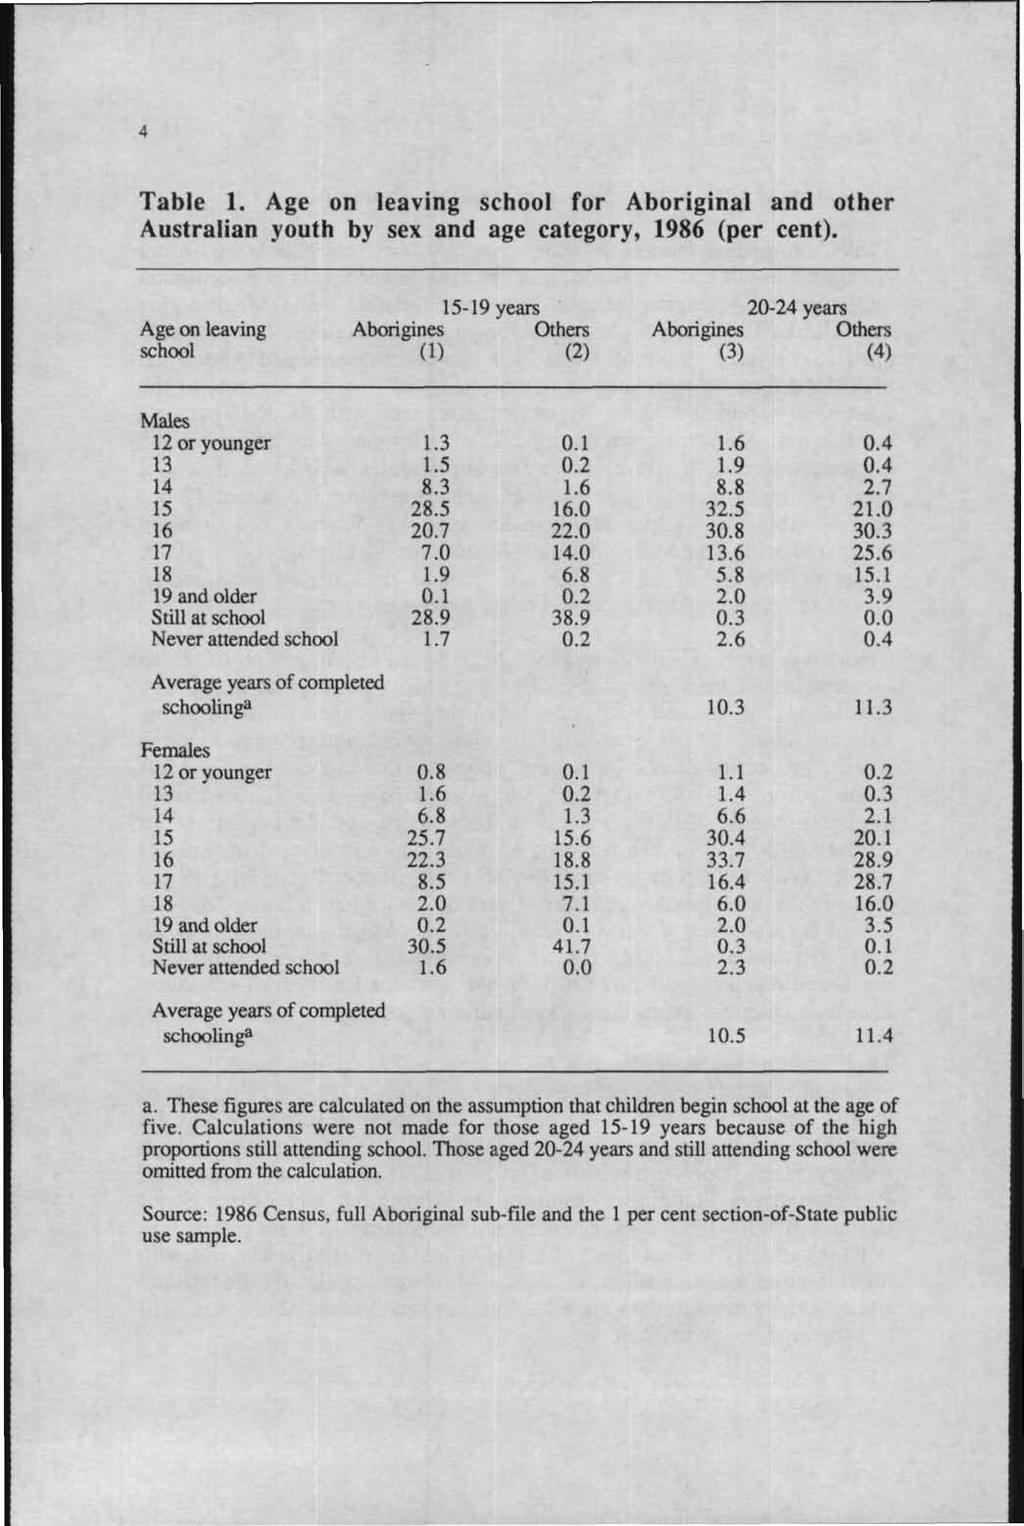 Table 1. Age on leaving school for Aboriginal and other Australian youth by sex and age category, 1986 (per cent).